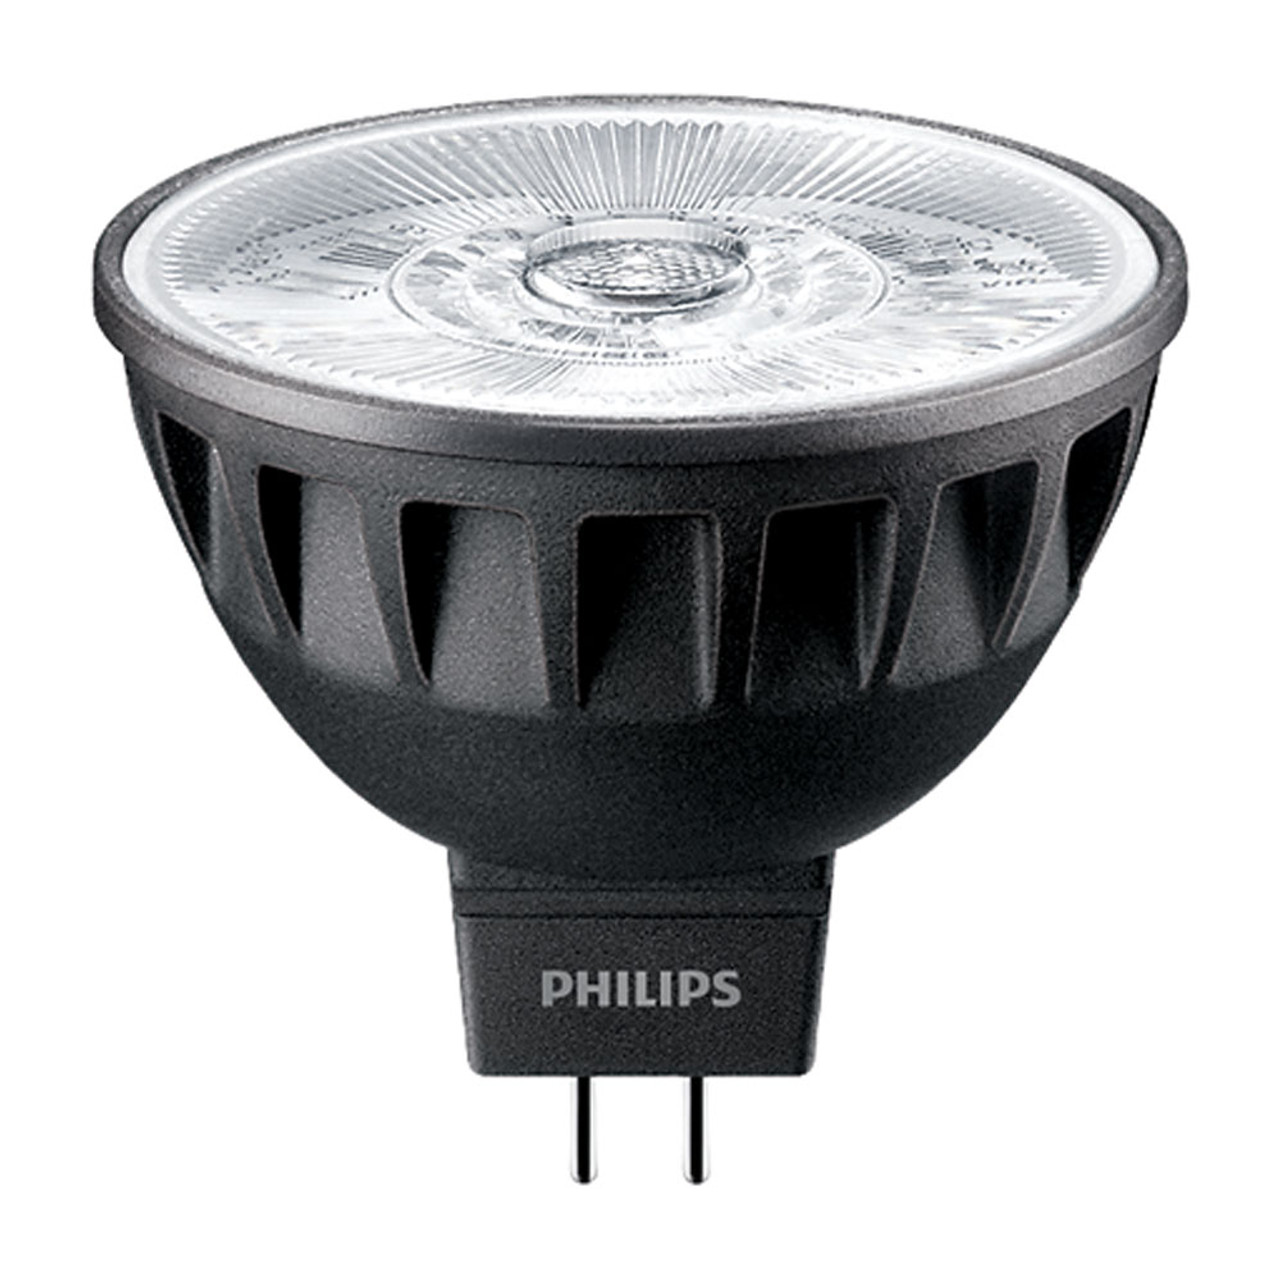 Philips Master LED 12V 6.7W (35W) Cool White 36 Degrees Dimmable RA97